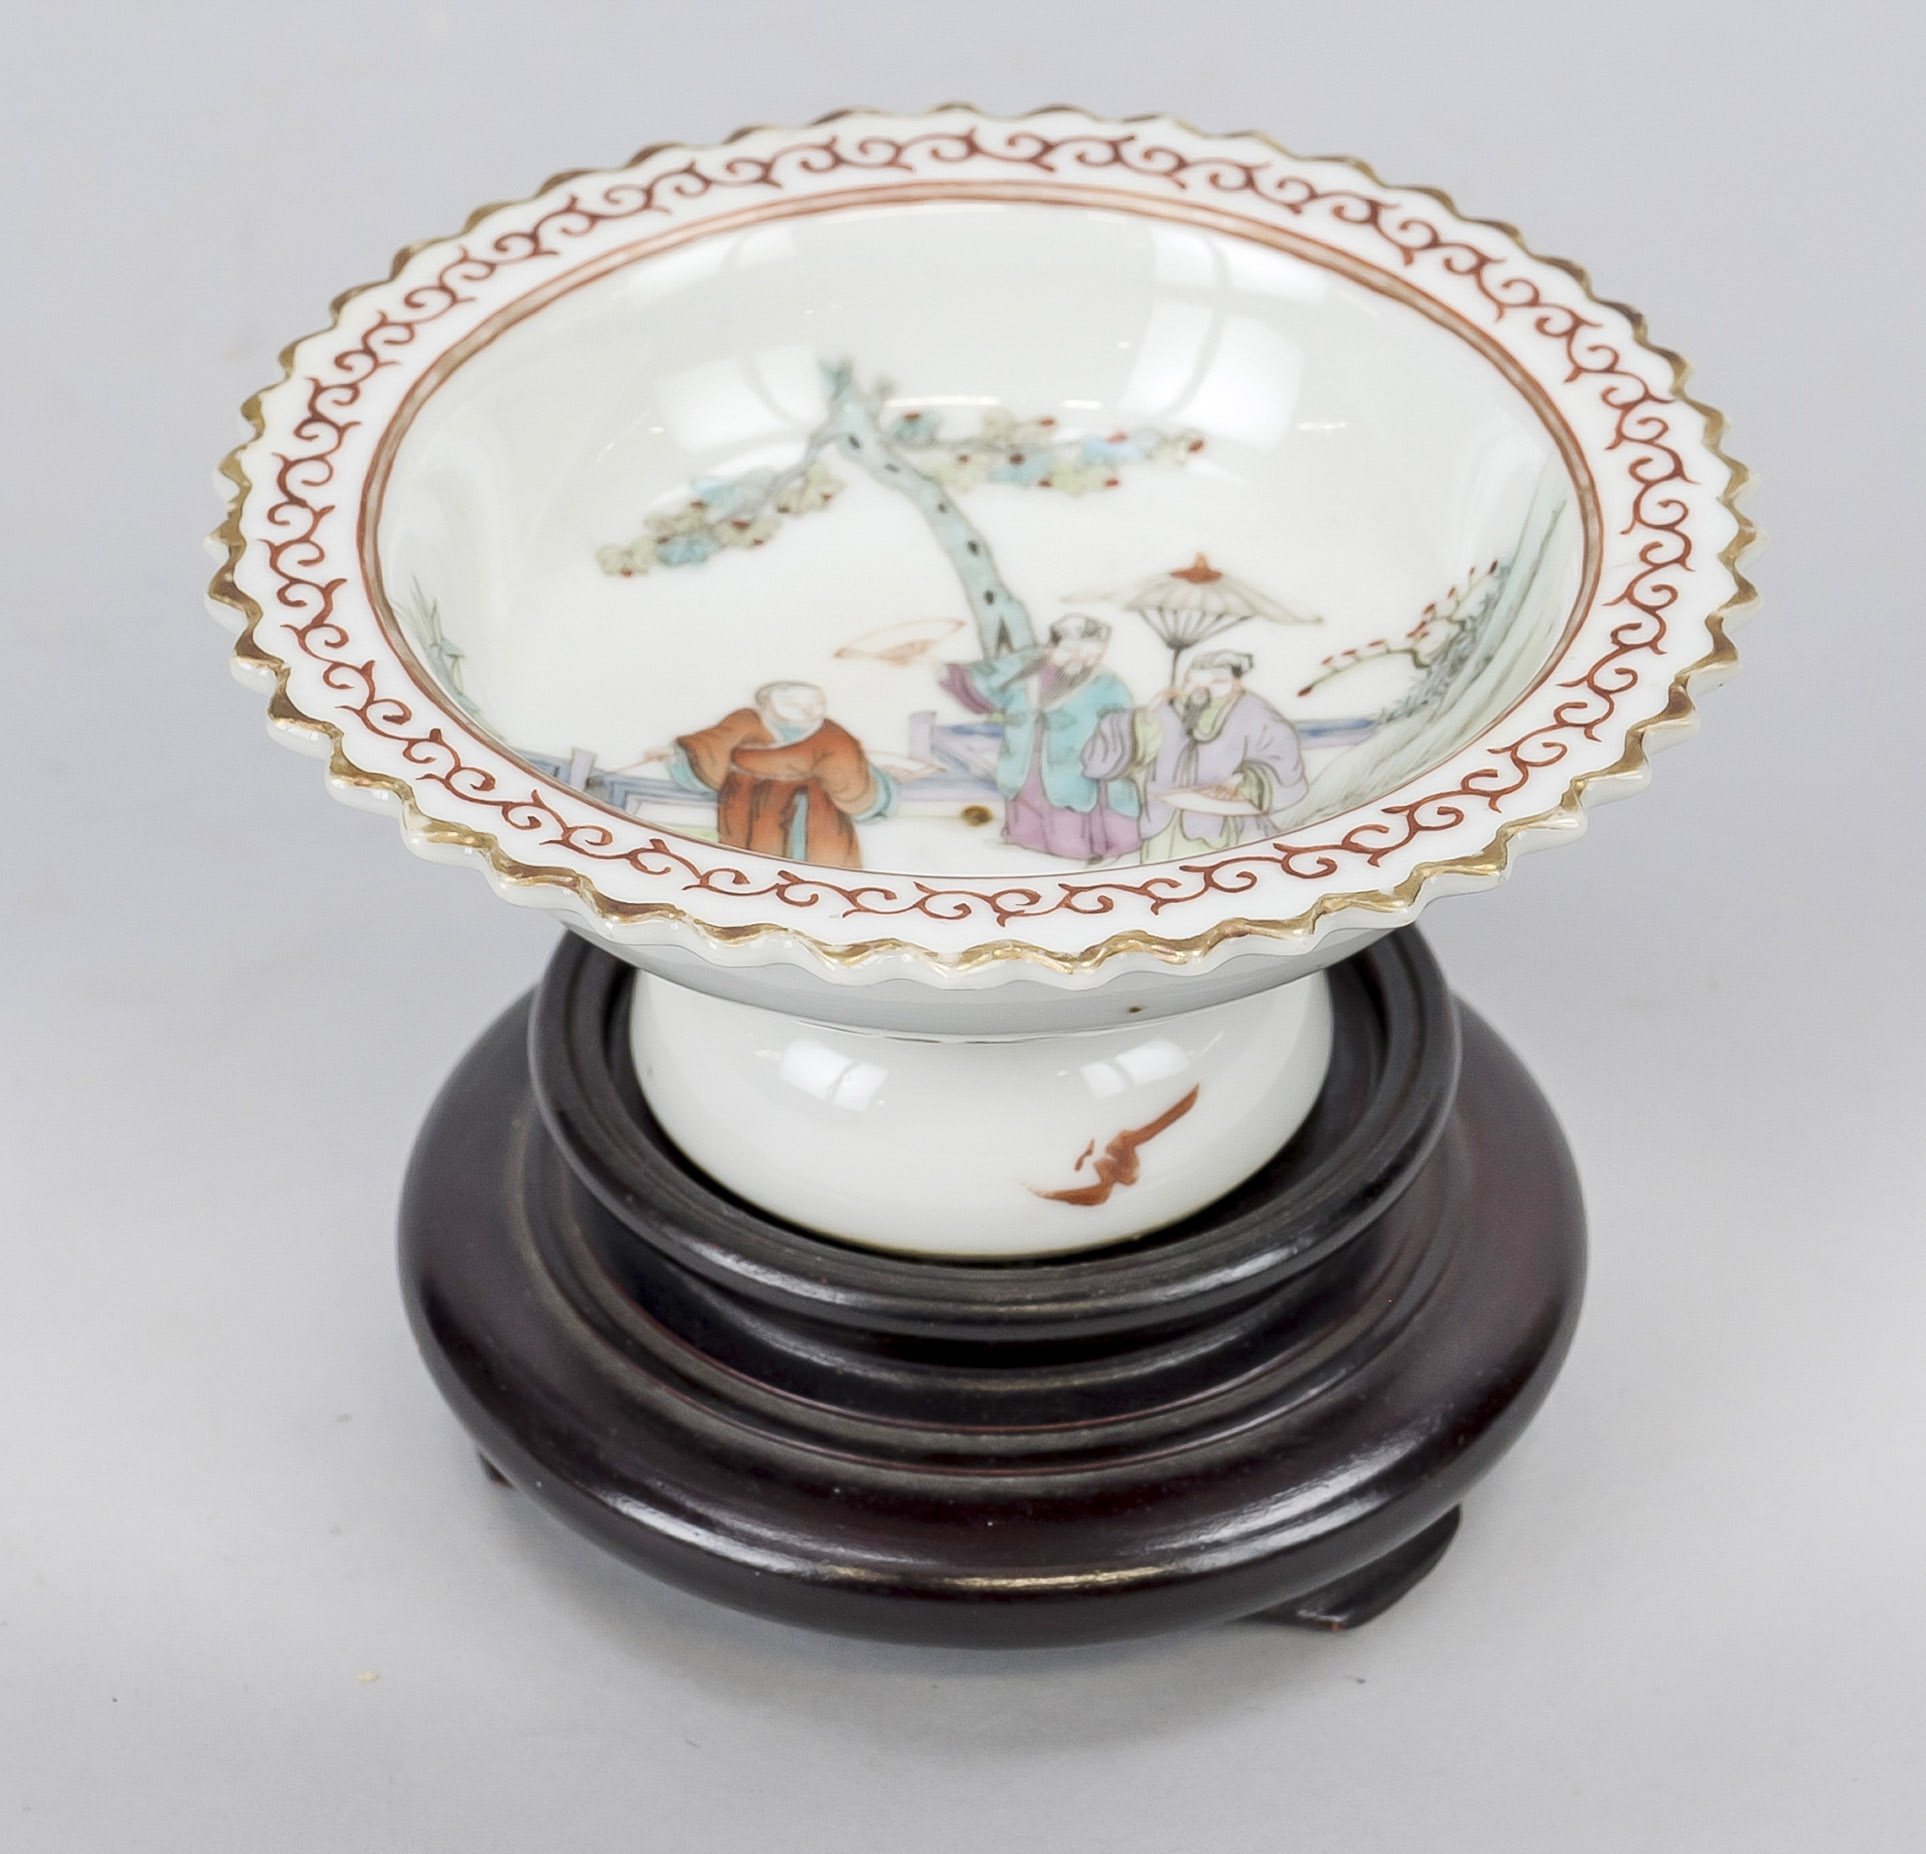 Small Famille Rose footed bowl, China 19th/20th century A multi-figure scene in the center, the